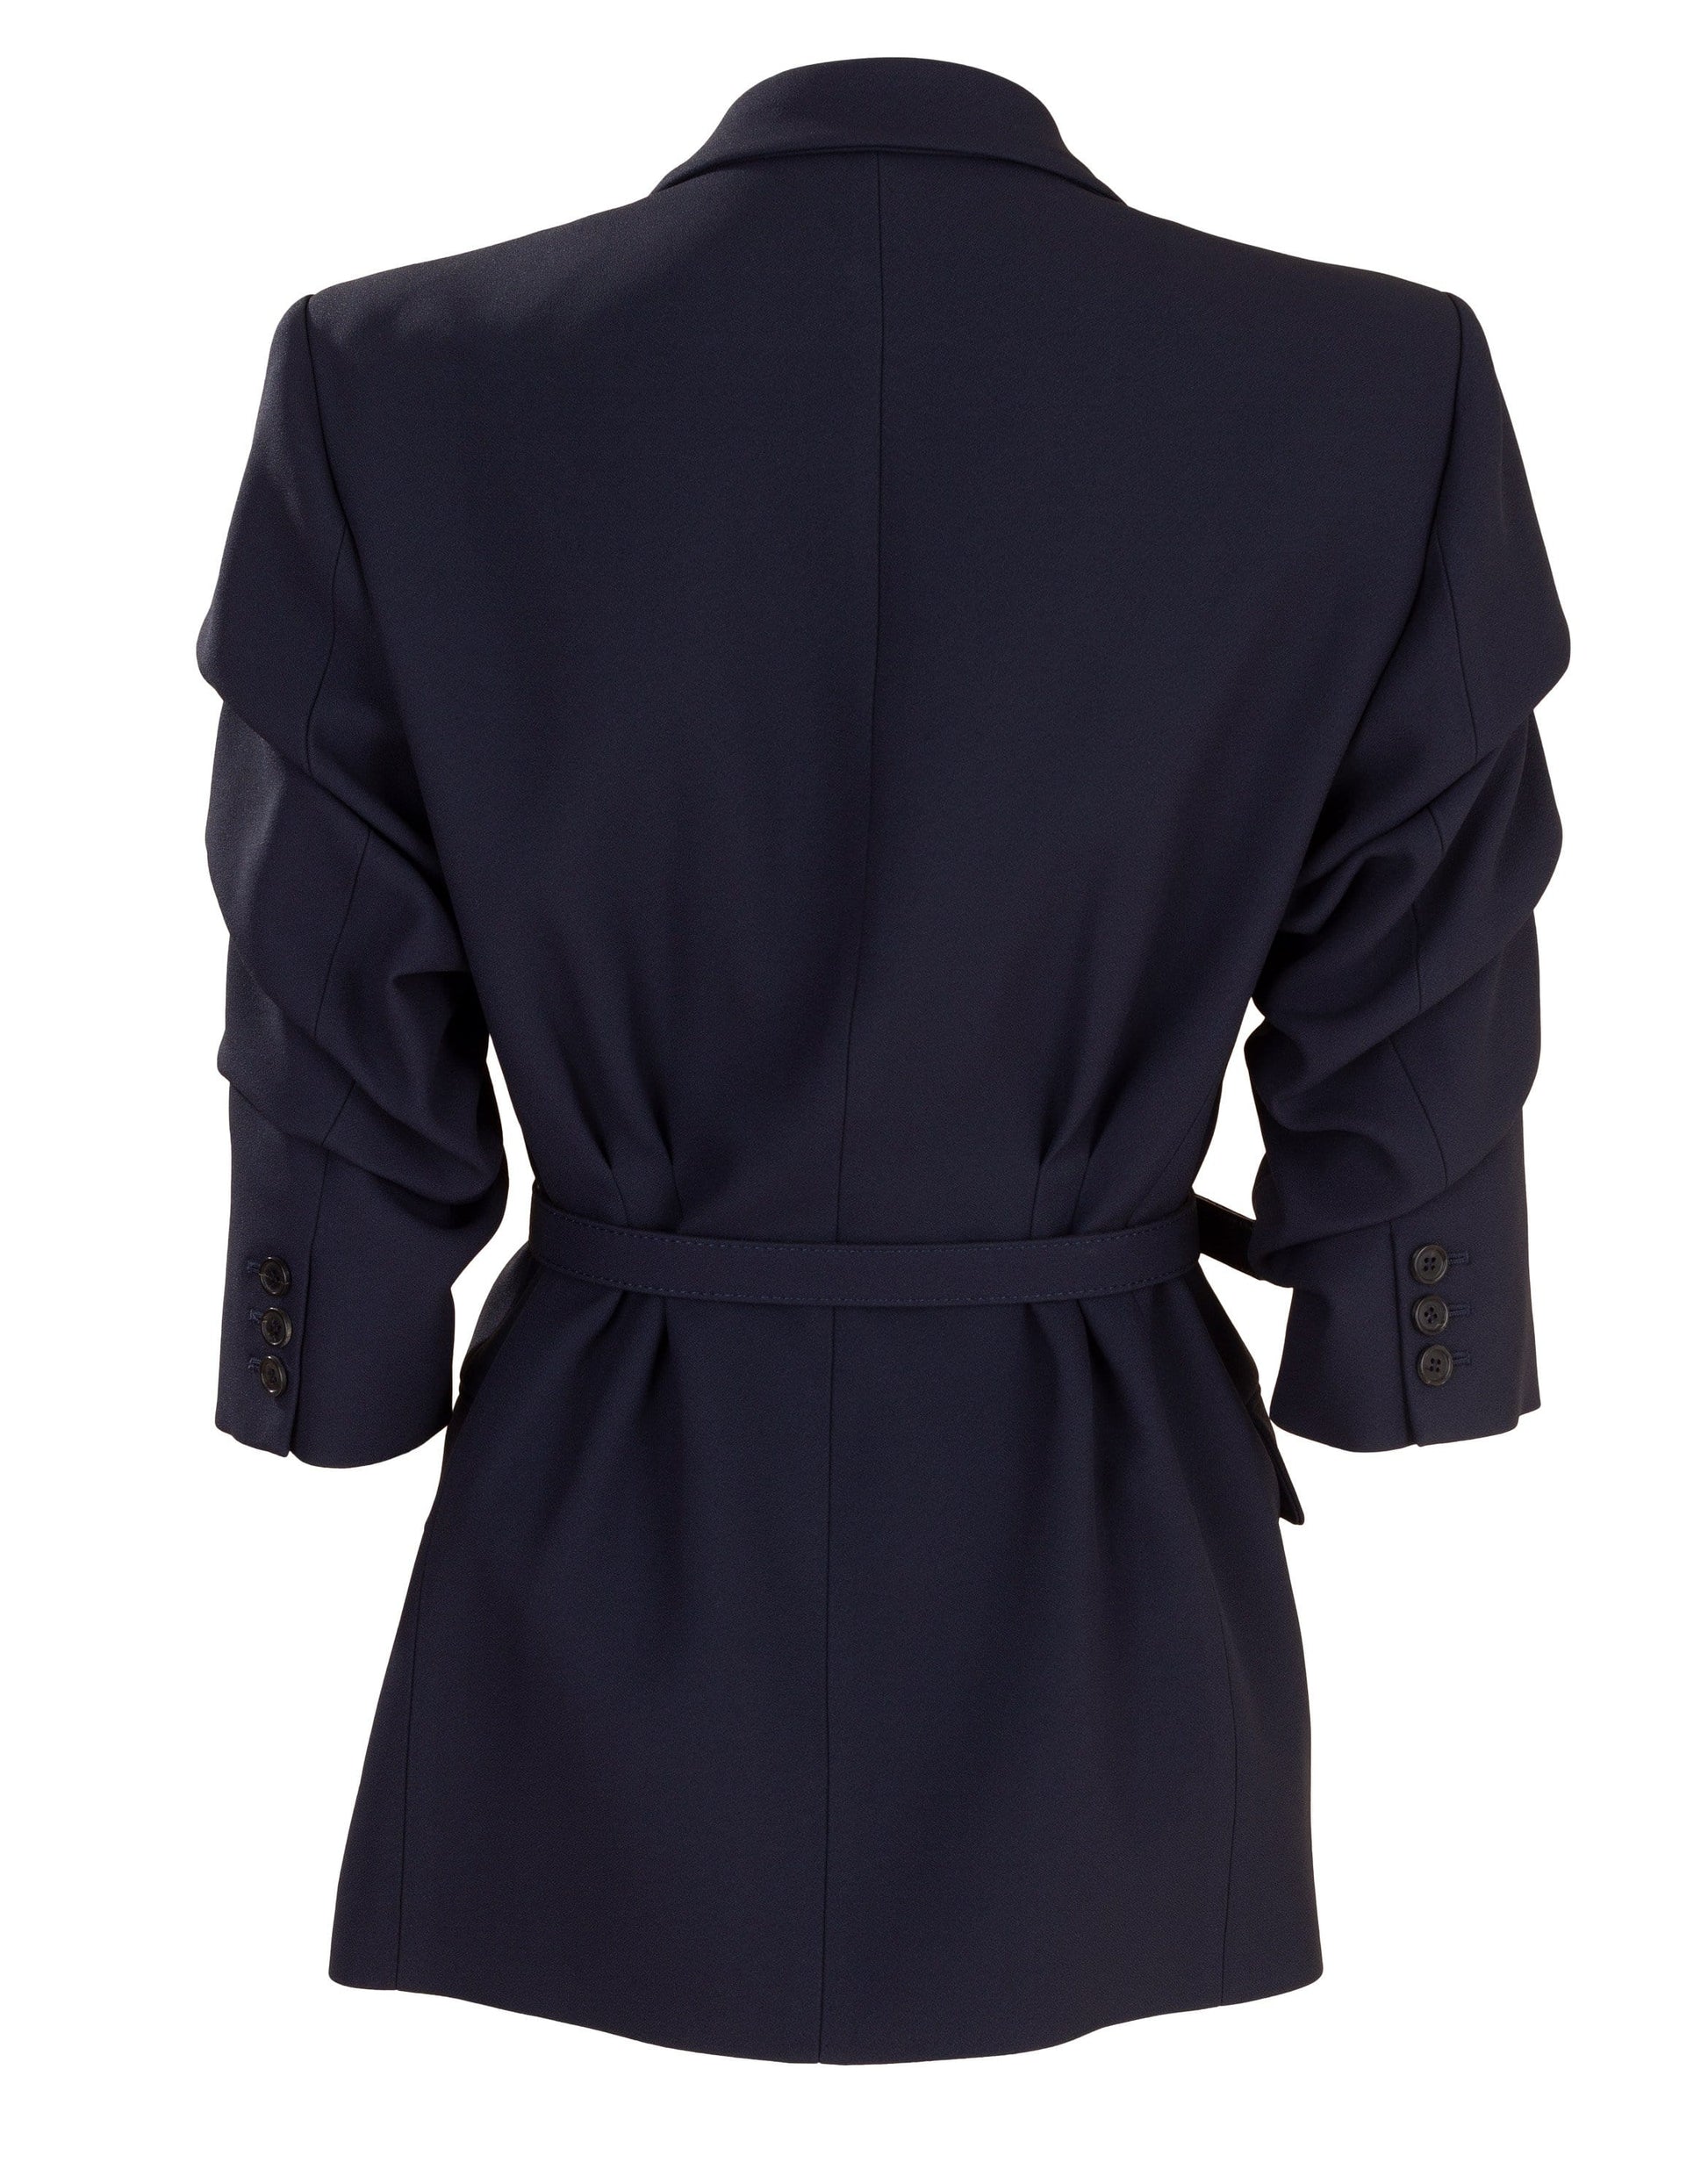 MICHAEL KORS-Midnight Crushed Sleeve Fitted Blazer-